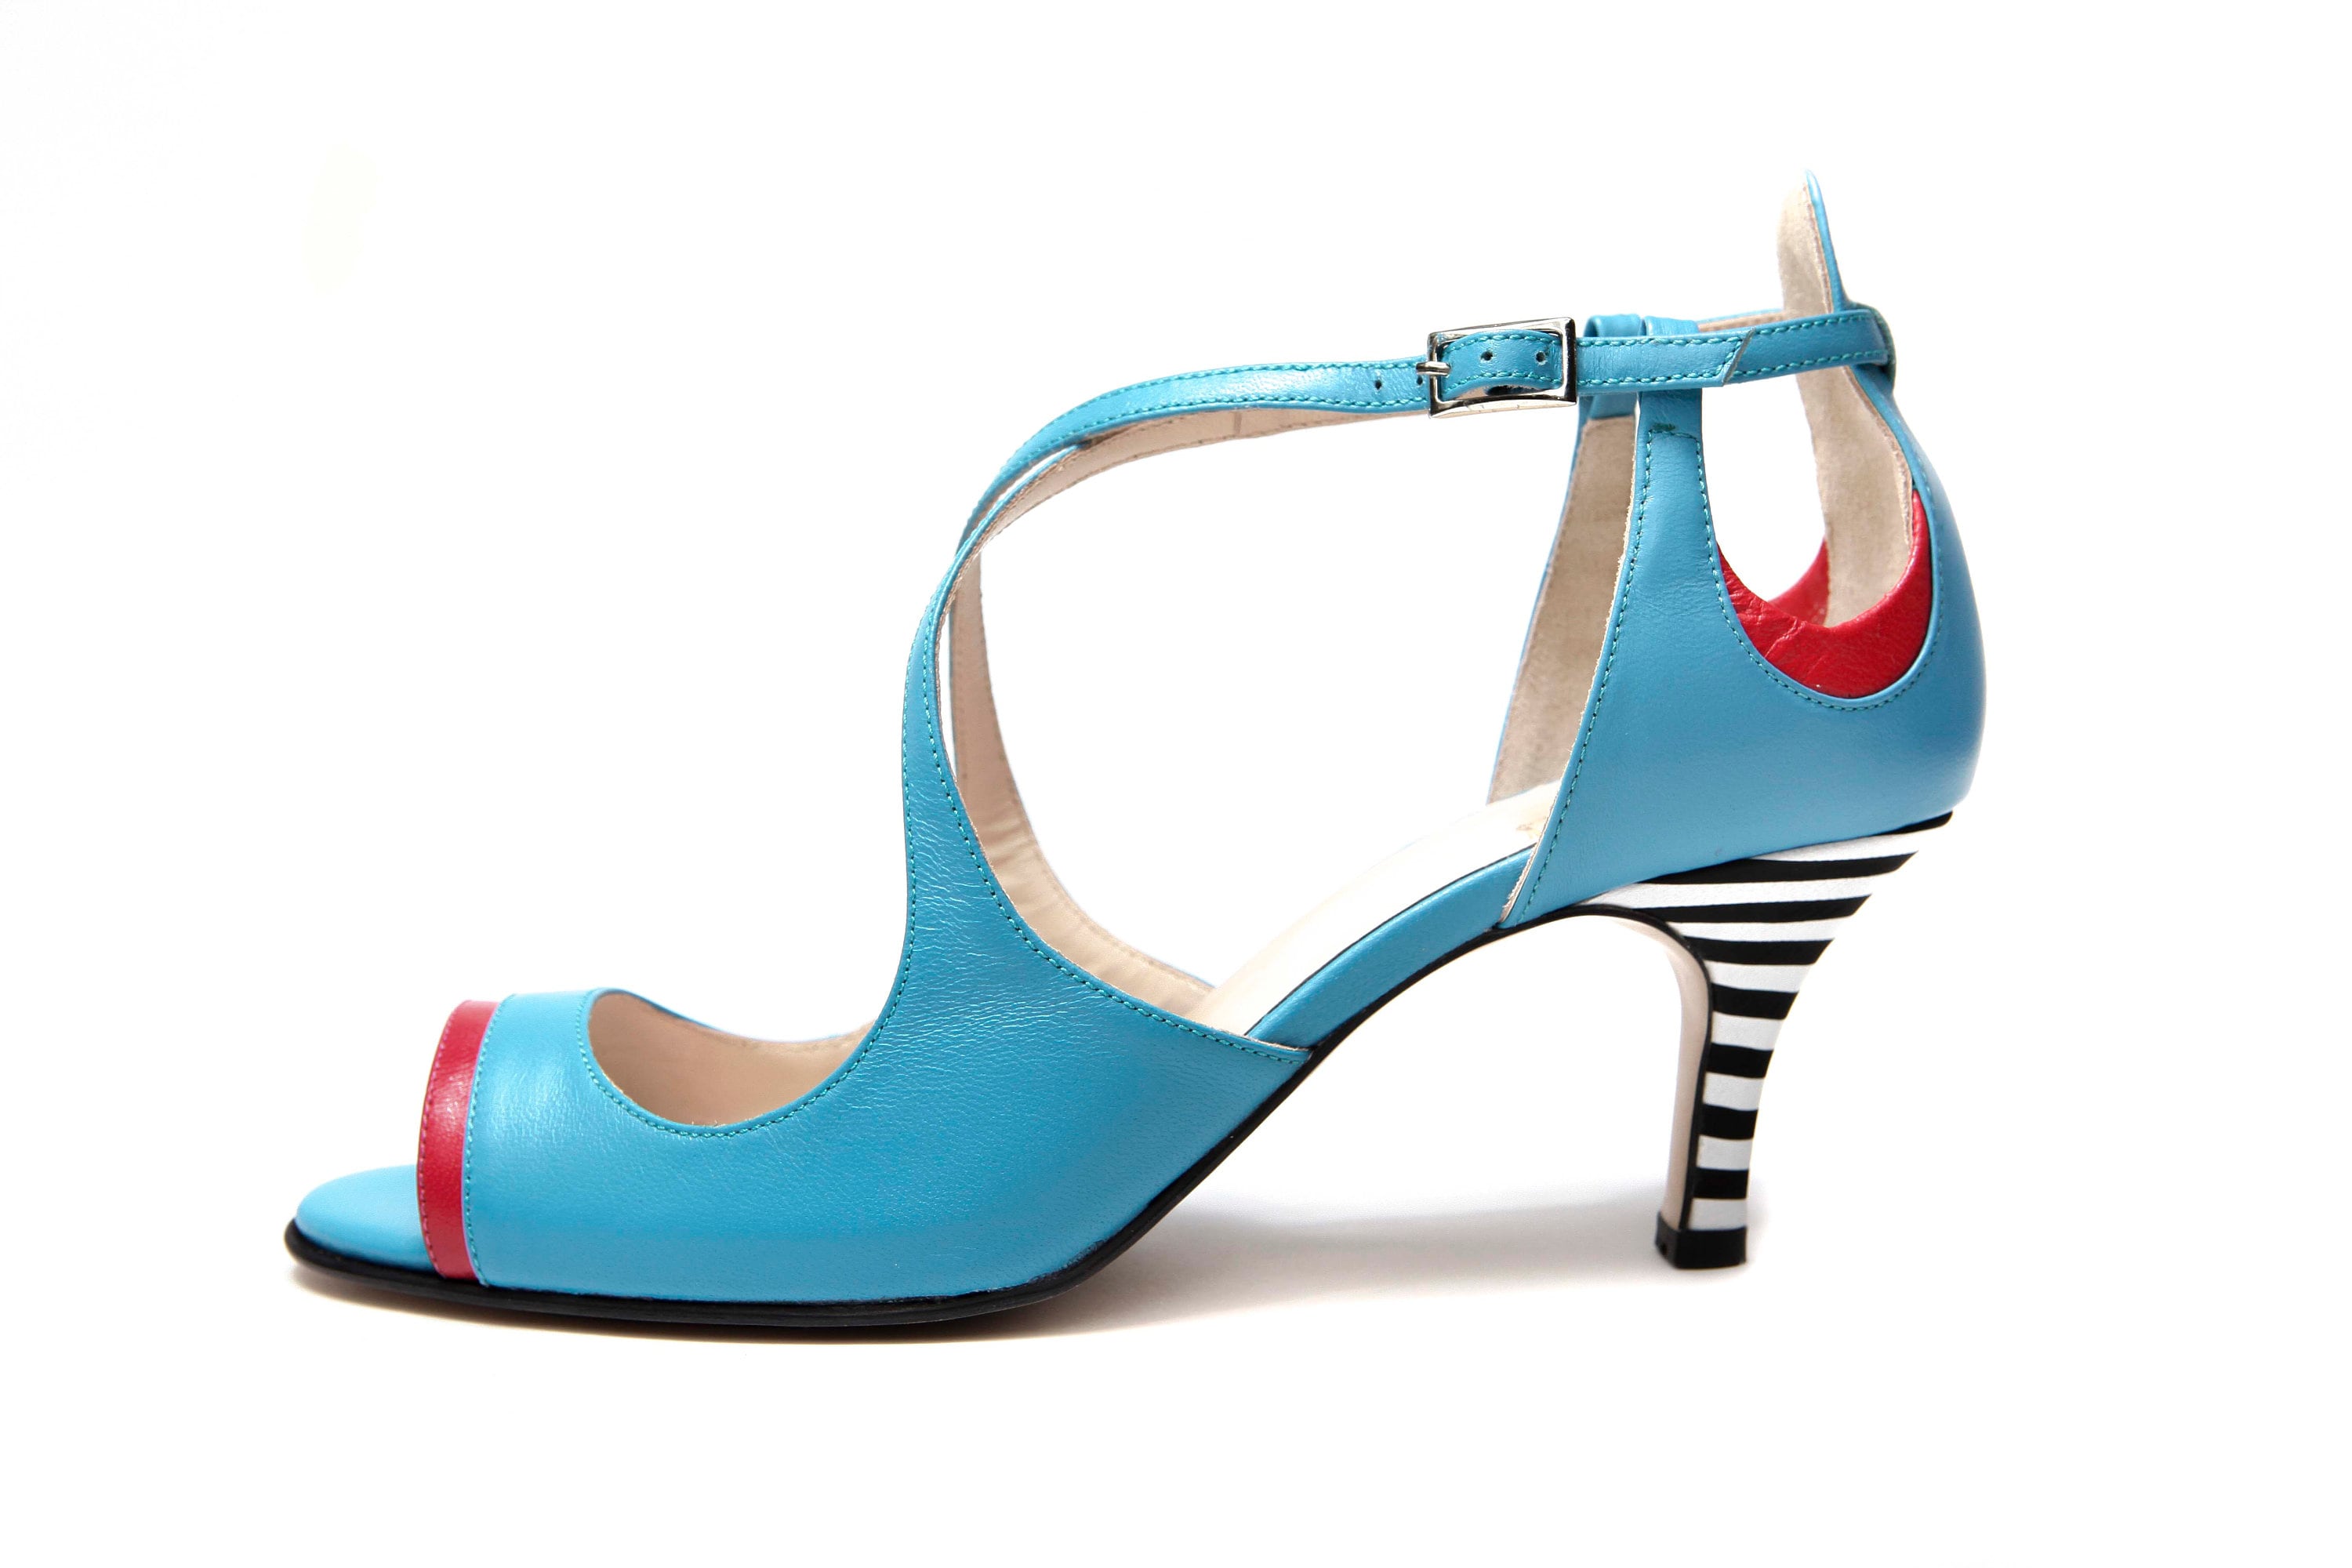 Ruby Shoo Chrissie Turquoise Heeled Corsage Court Shoes - Pretty Kitty  Fashion